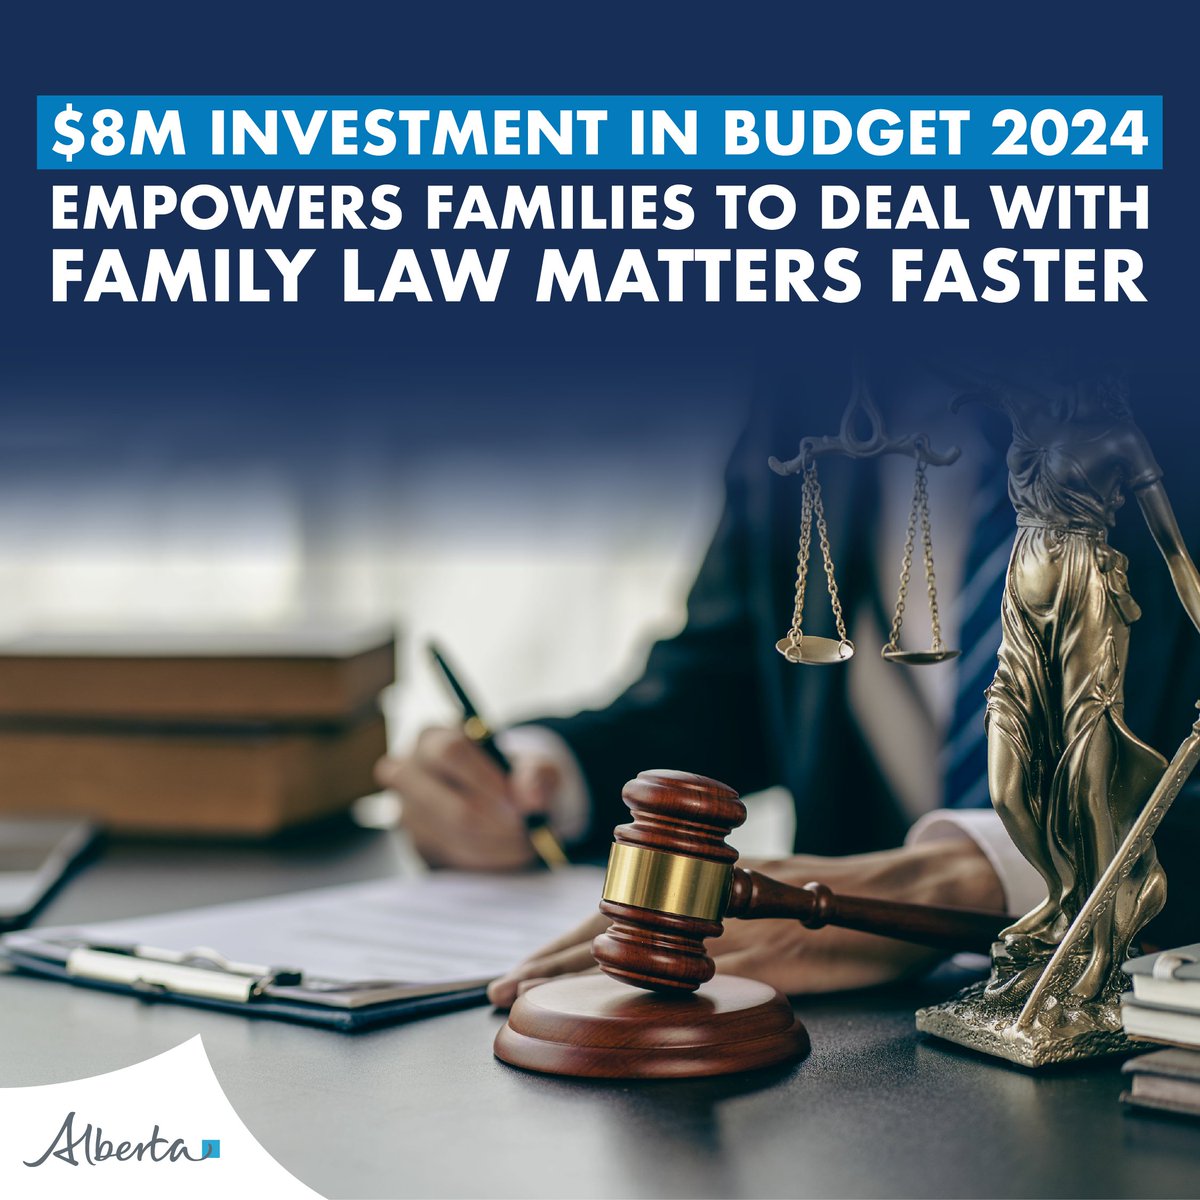 At some point in their lives, many Albertans will need to seek help from the legal system to address a family law matter, such as separation, divorce, or child support. I am happy to announce that Budget 2024 invests $8 million for family justice services through the Family…